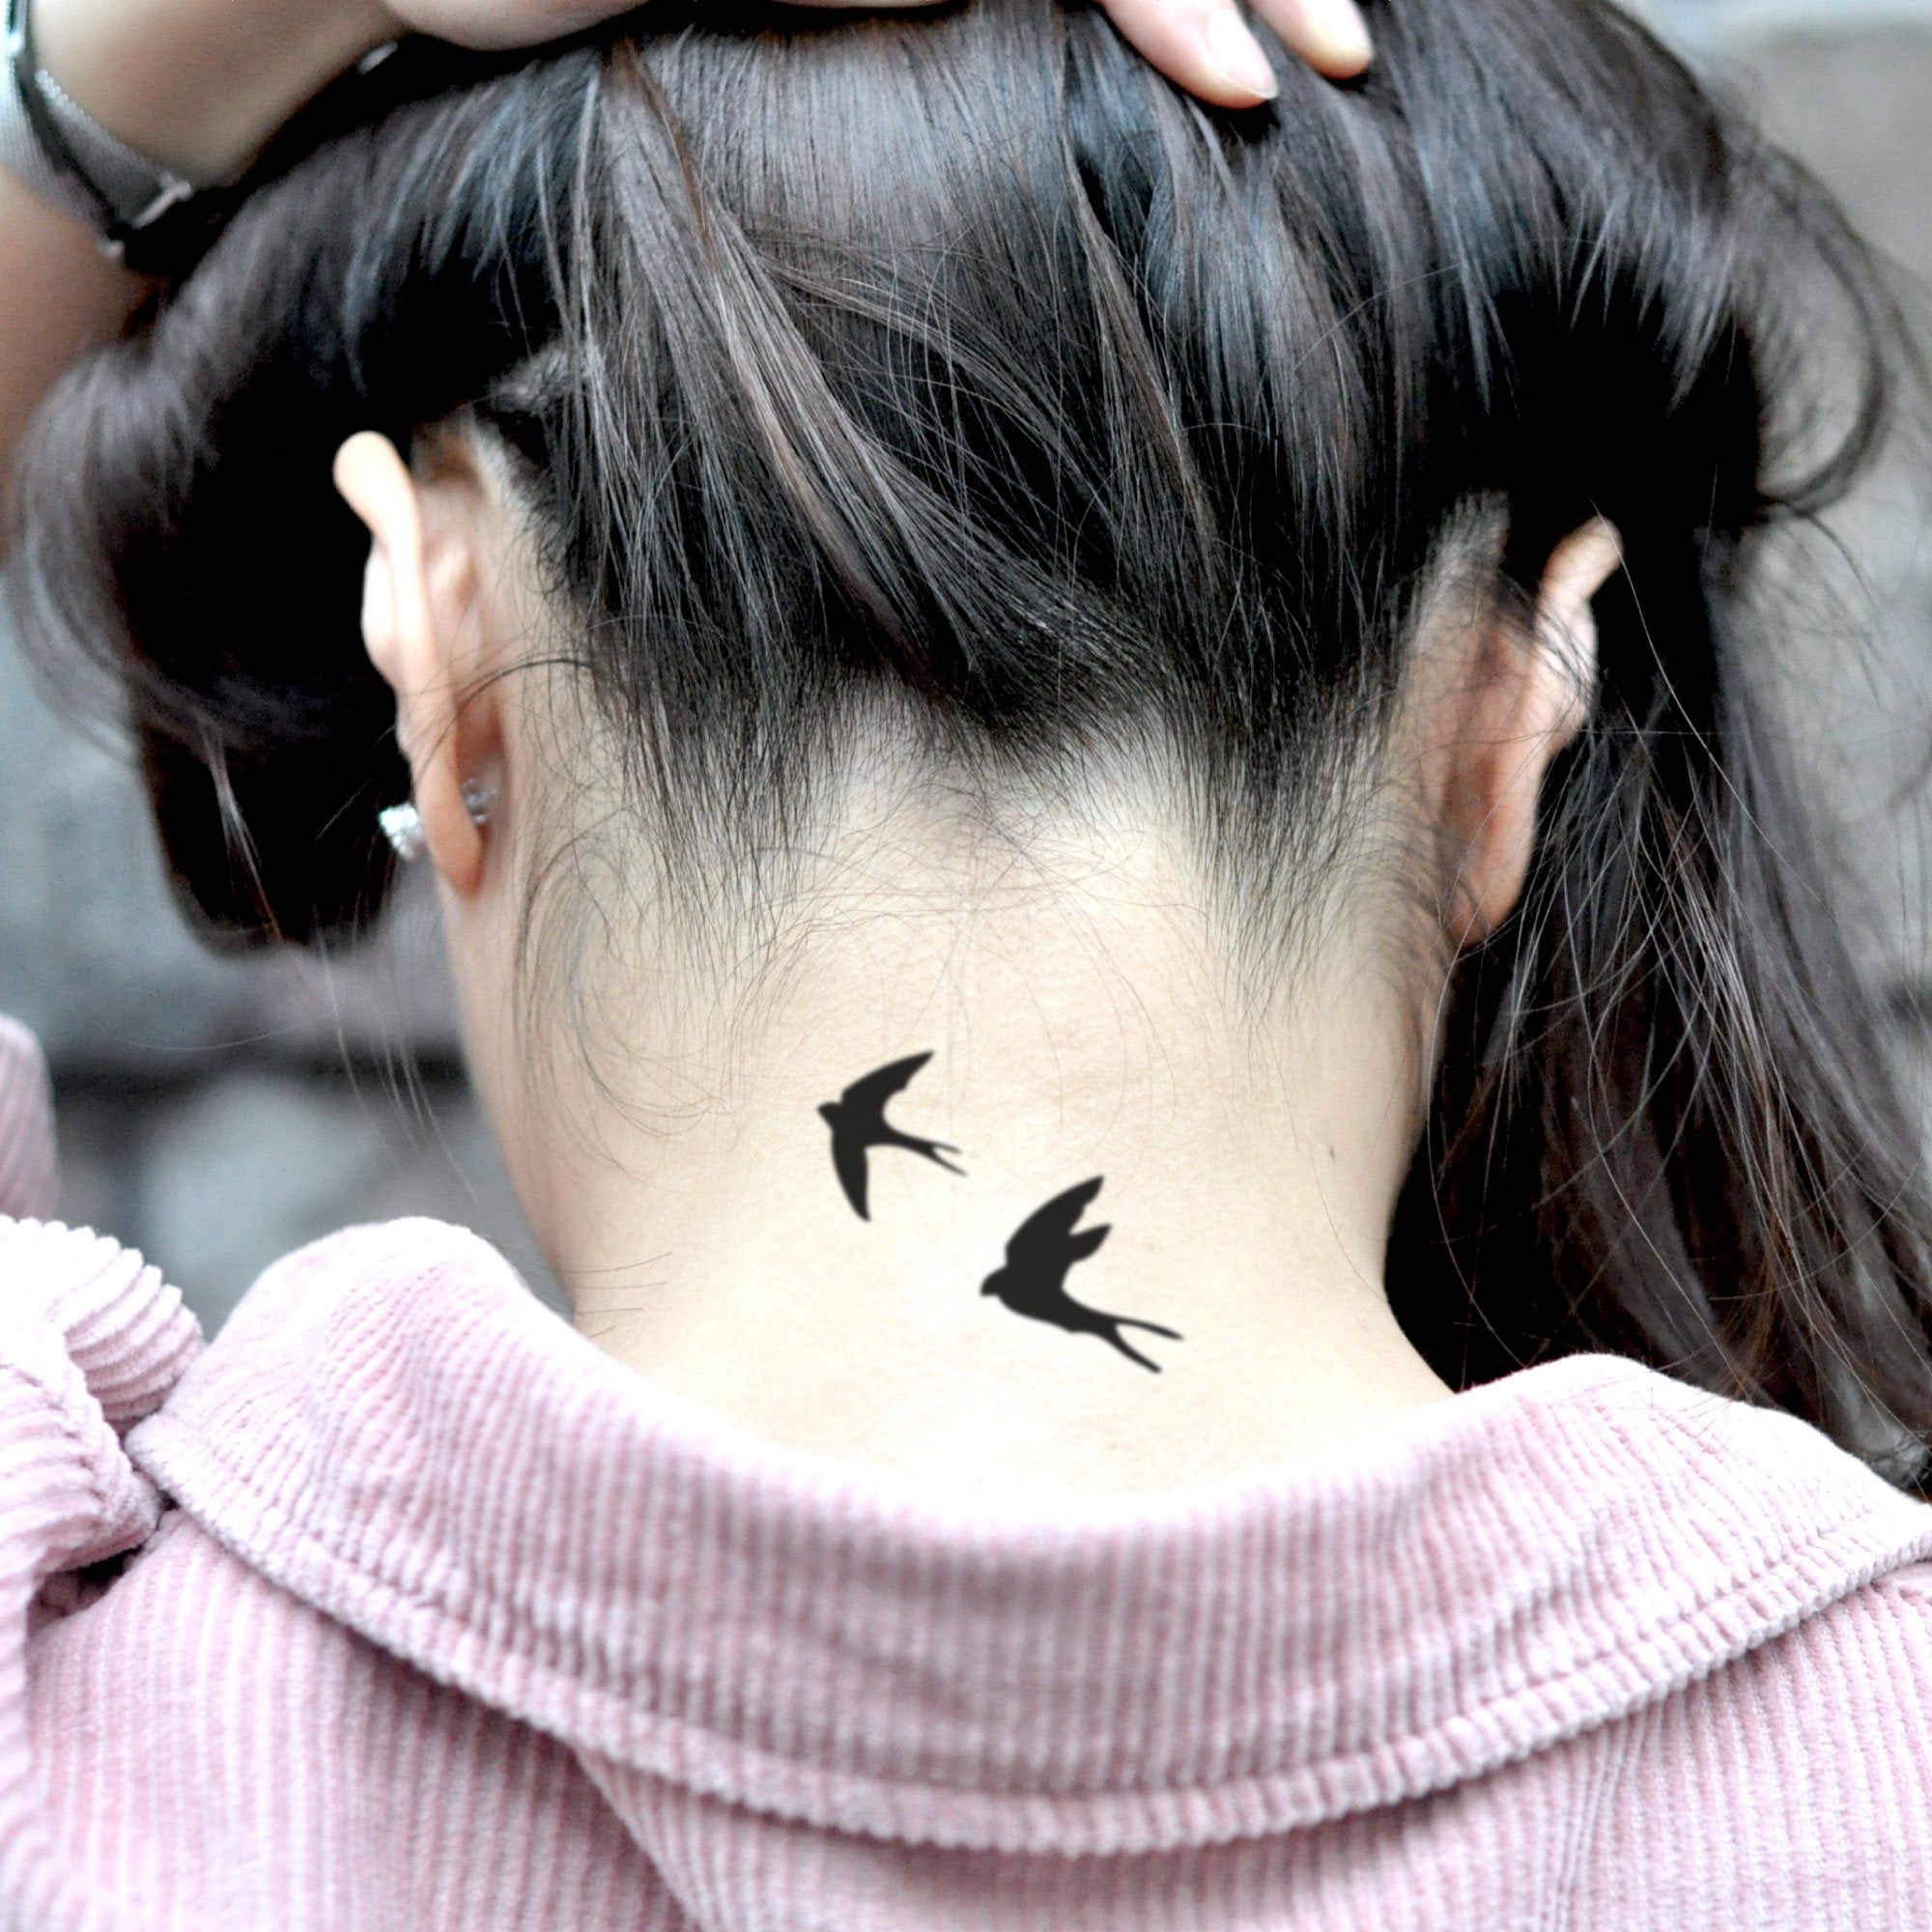 40 Awesome Neck Tattoo Ideas for Men  Women in 2023